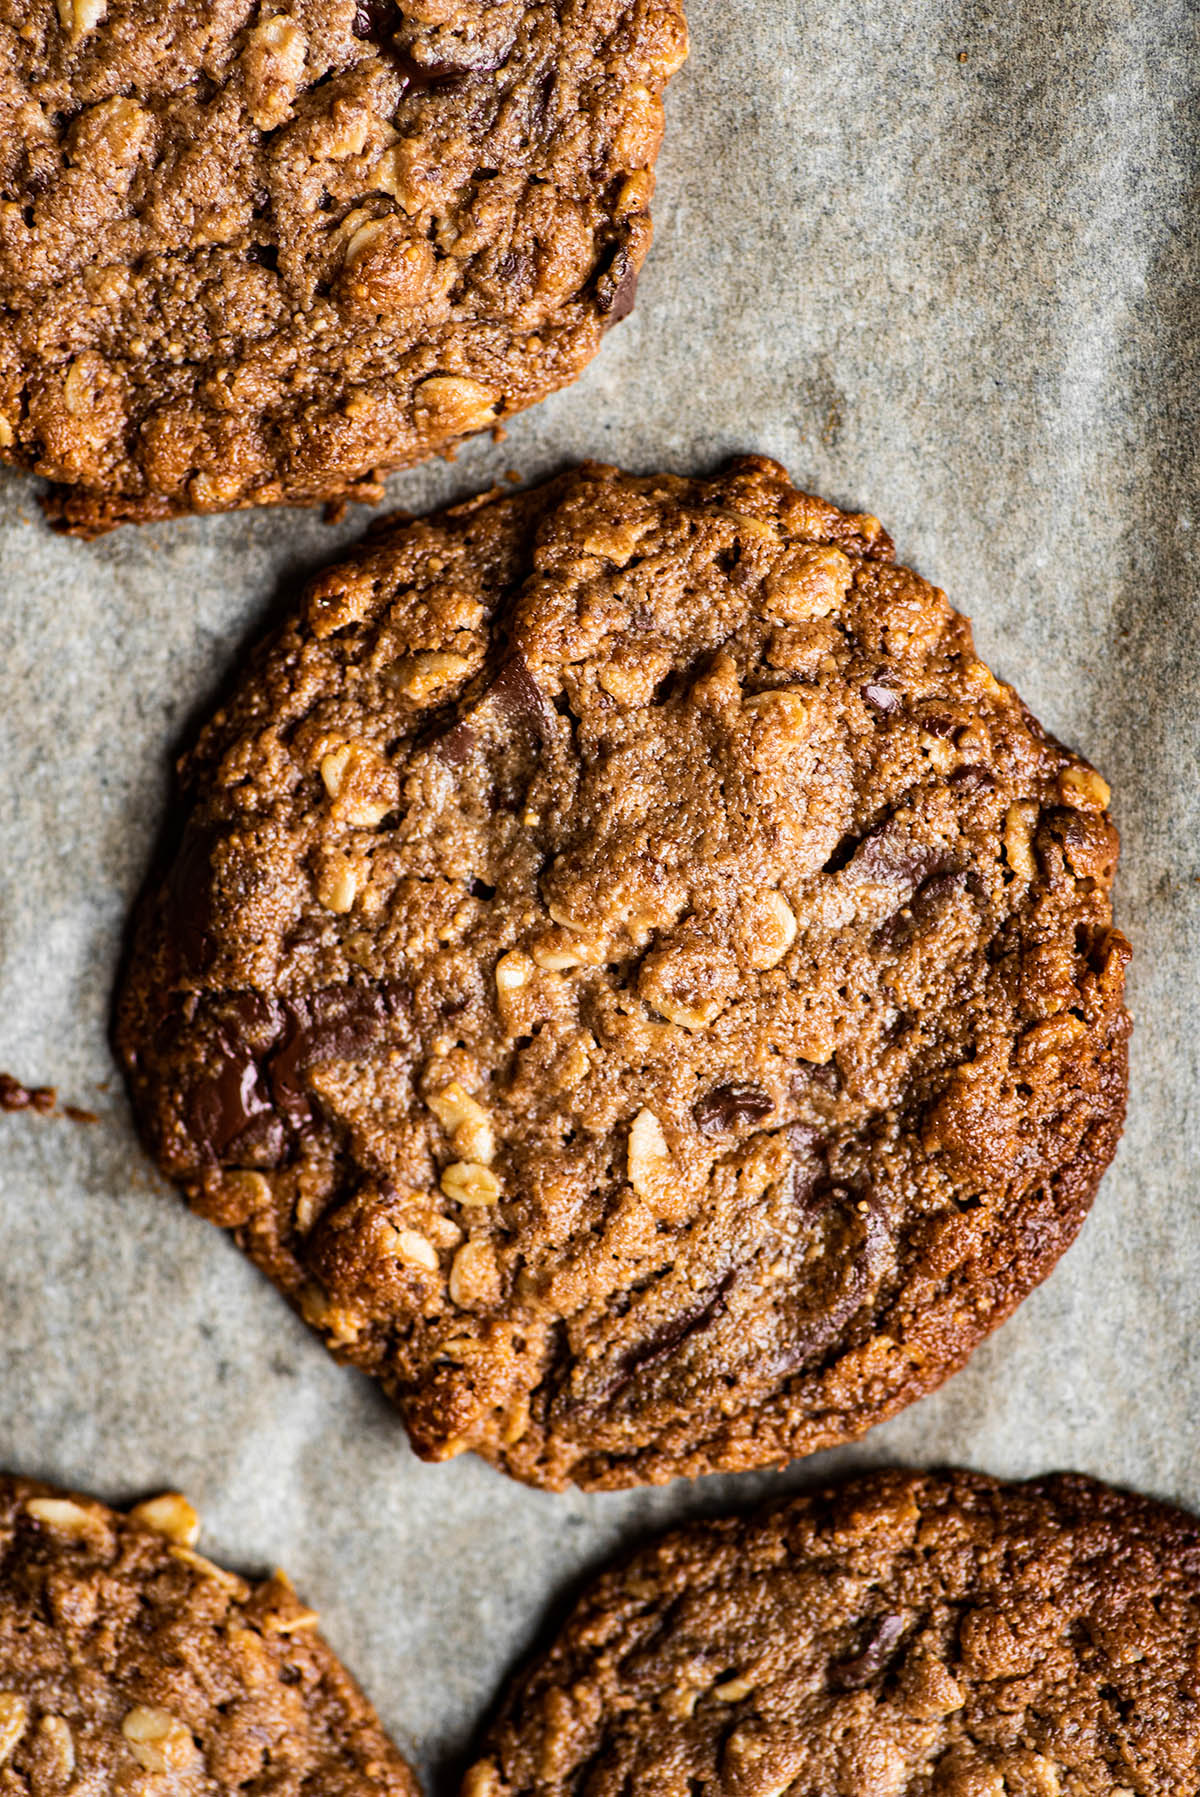 Close up of a chocolate chunk peanut butter oatmeal cookie.